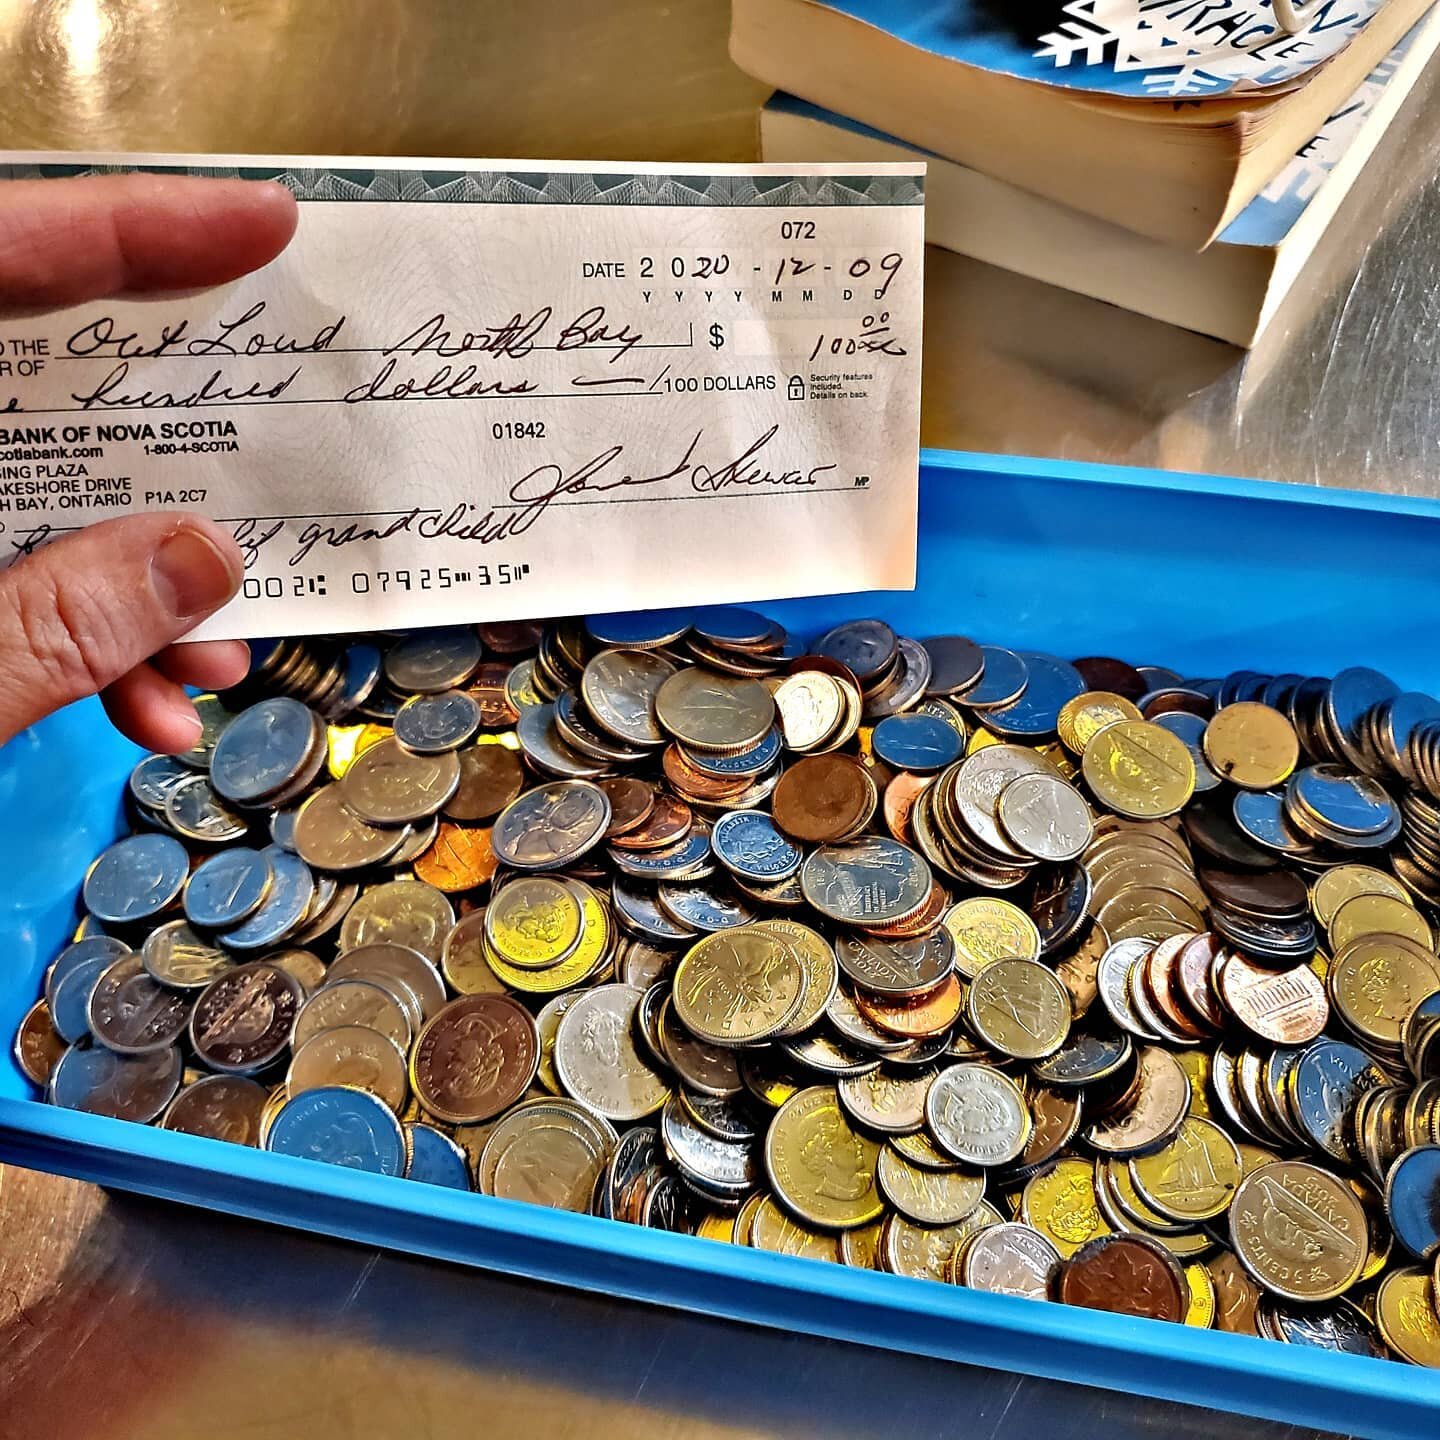 A photo of a donation check and a container of coins